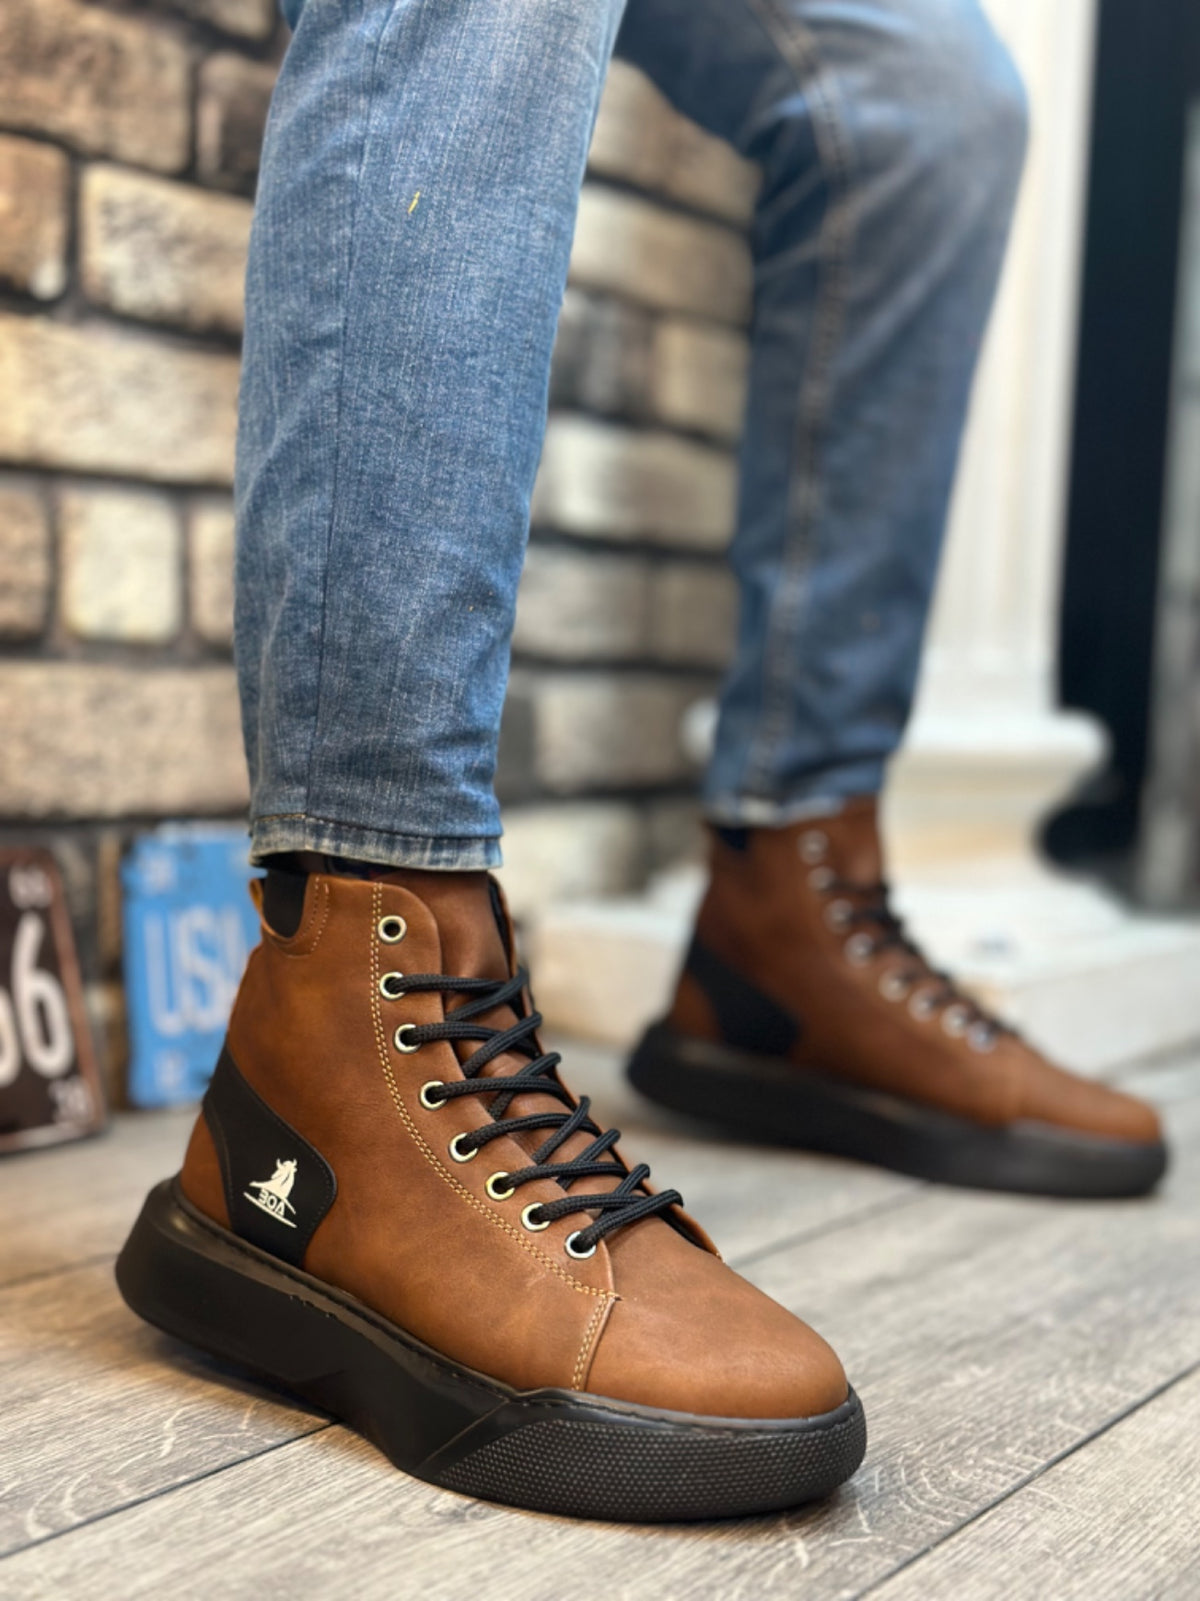 BA0155 Lace-Up Men's High-Sole Tan Sports Boots